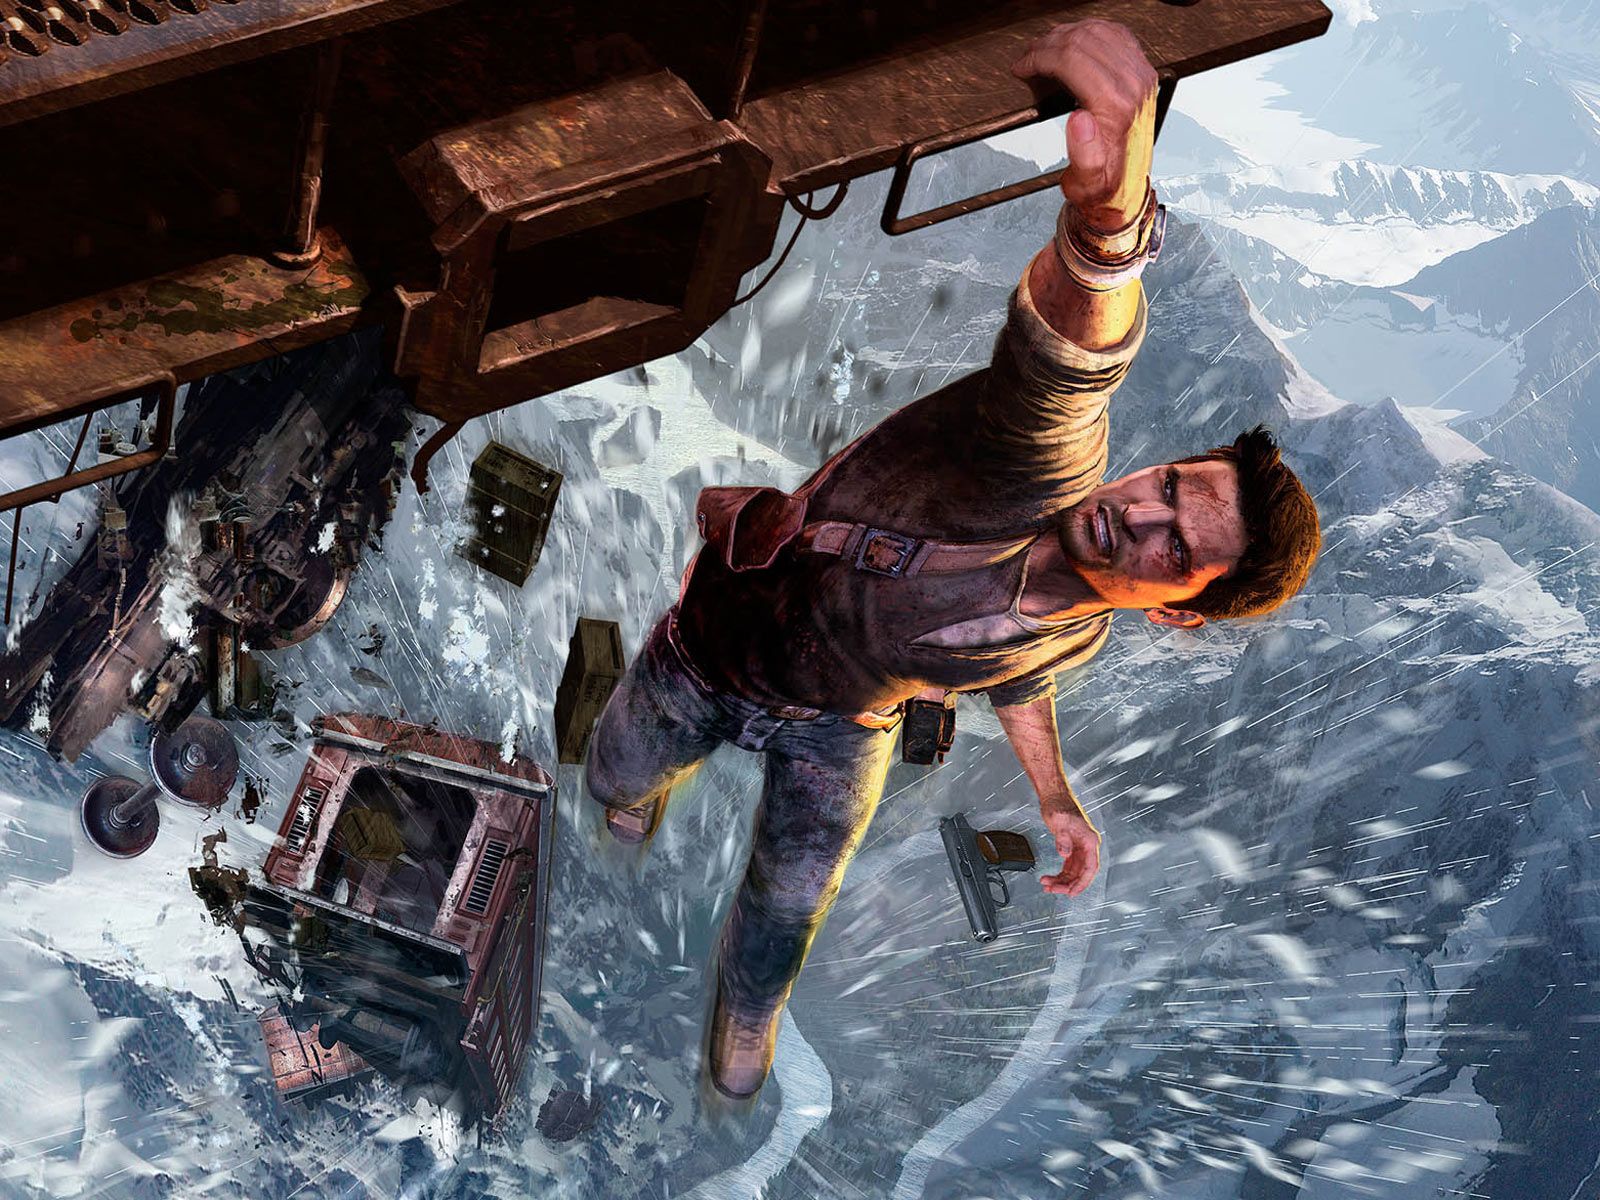 Uncharted 2 Debuts As Playstation 3's Second Best Game Of All Time  According To MetaCritic